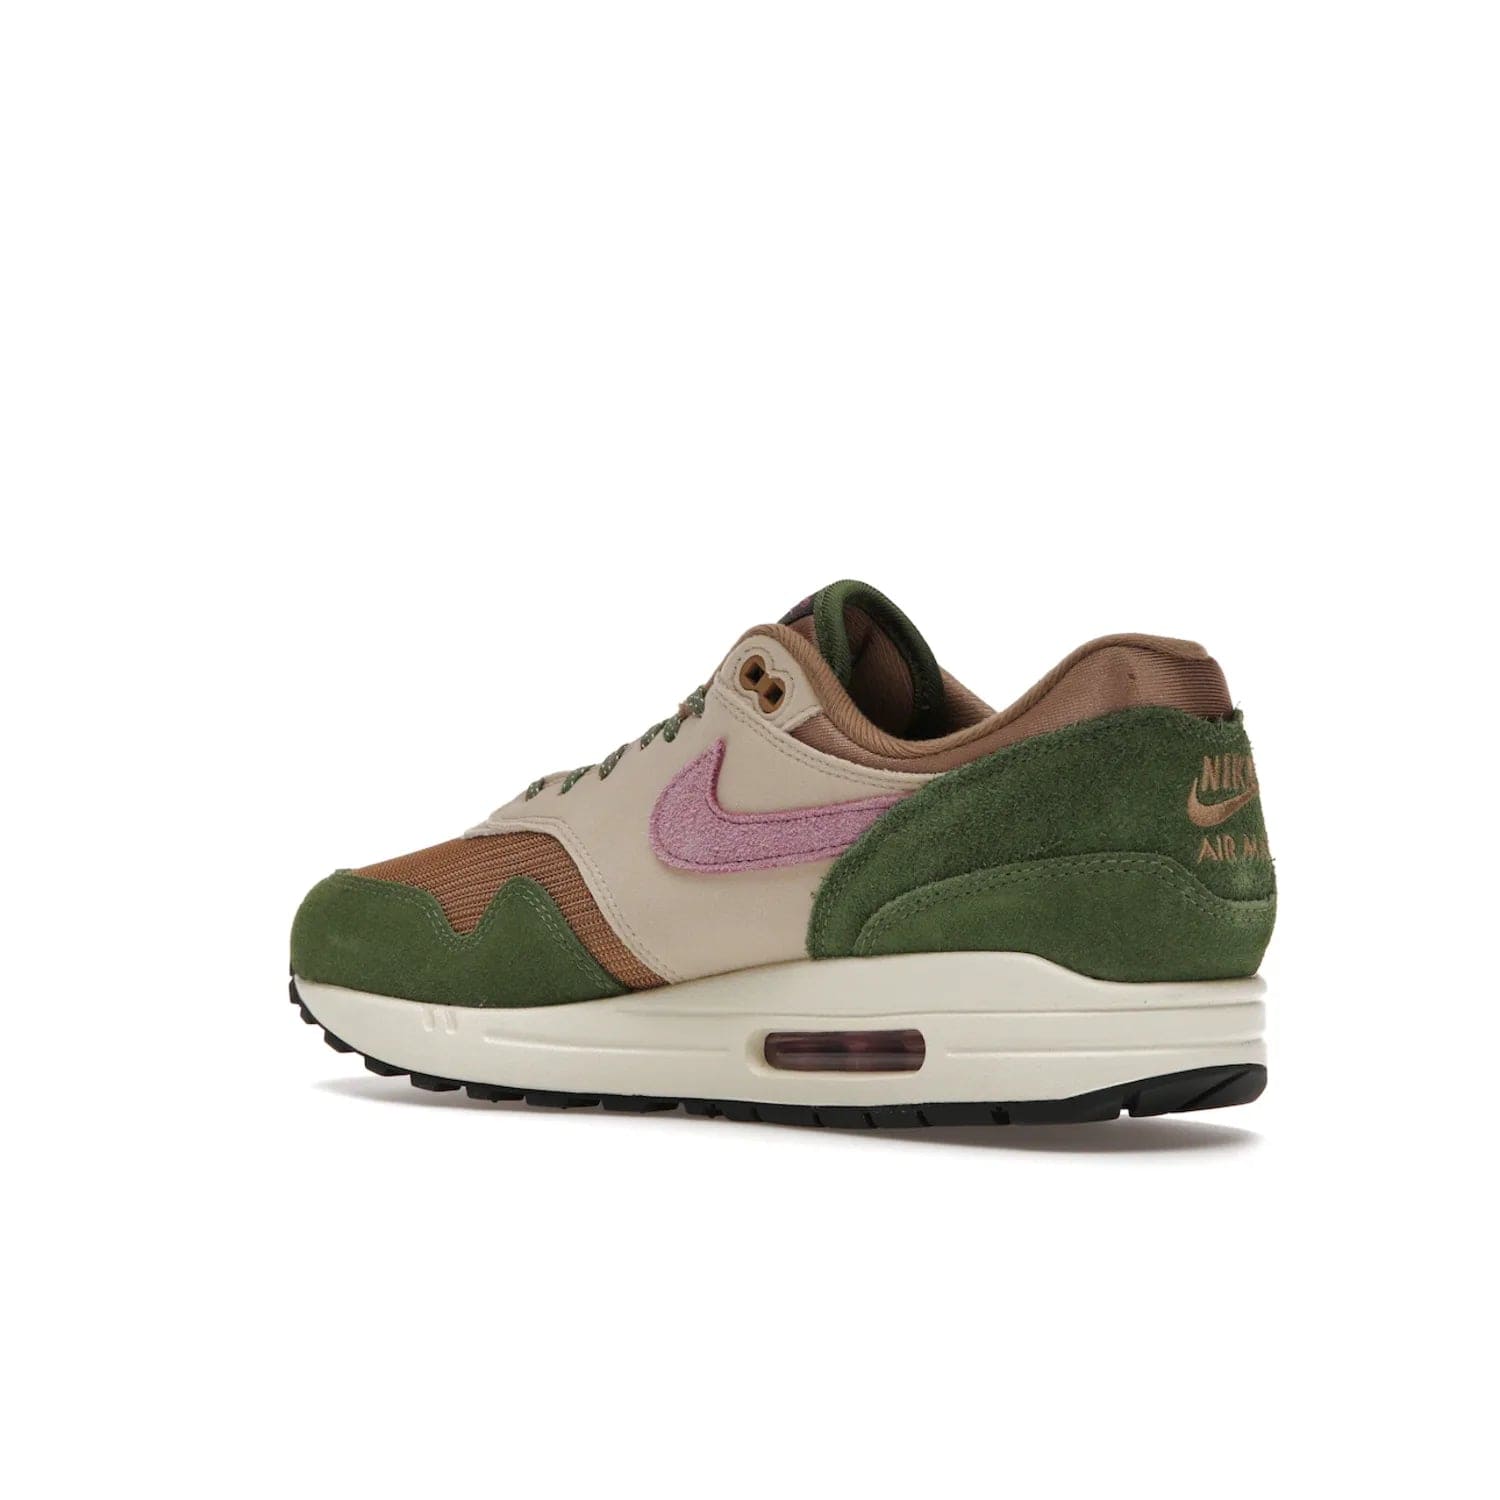 Nike Air Max 1 SH Treeline - Image 23 - Only at www.BallersClubKickz.com - A classic Nike Air Max 1 SH Treeline with a brown mesh upper, taupe Durabuck overlays, and hairy green suede details. Light Bordeaux Swoosh and woven tongue label for a pop of color. Released in May 2022. Perfect for any outfit and sure to impress.